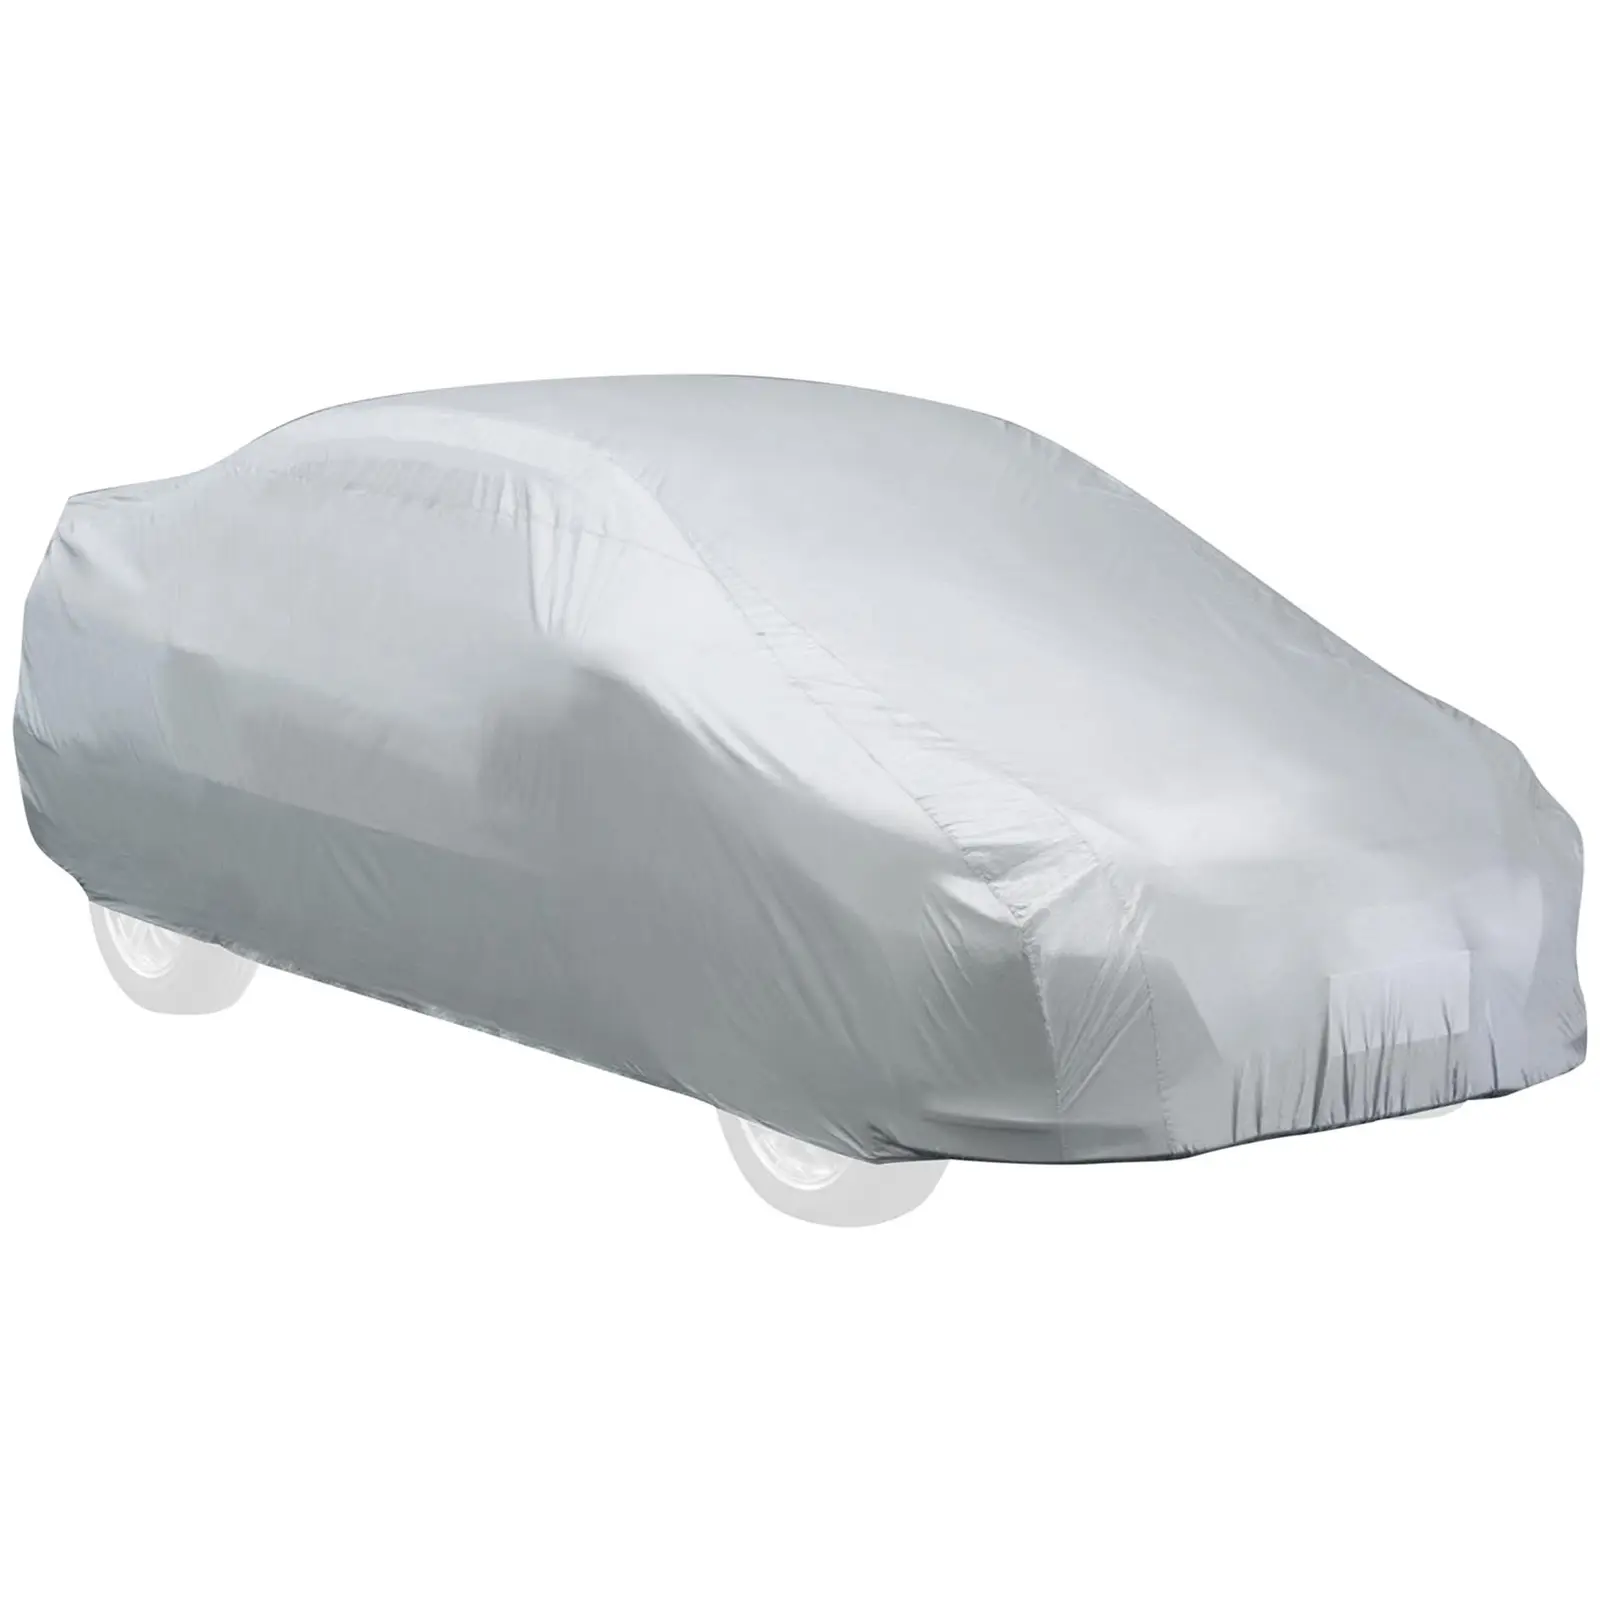 Car Cover - 3 layers size XL